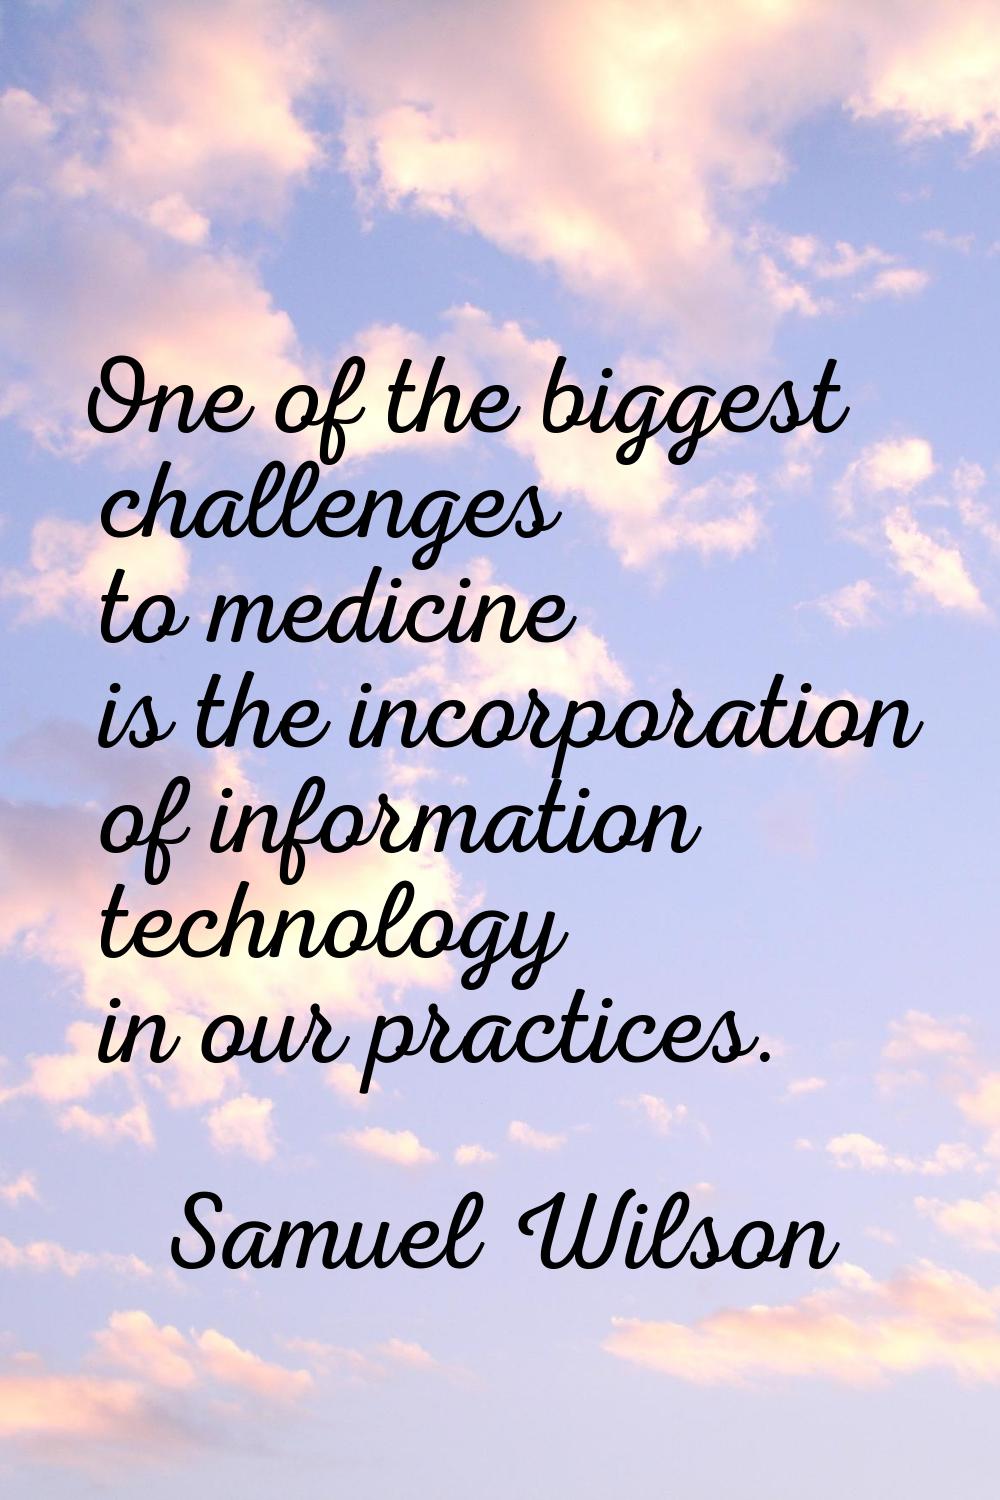 One of the biggest challenges to medicine is the incorporation of information technology in our pra